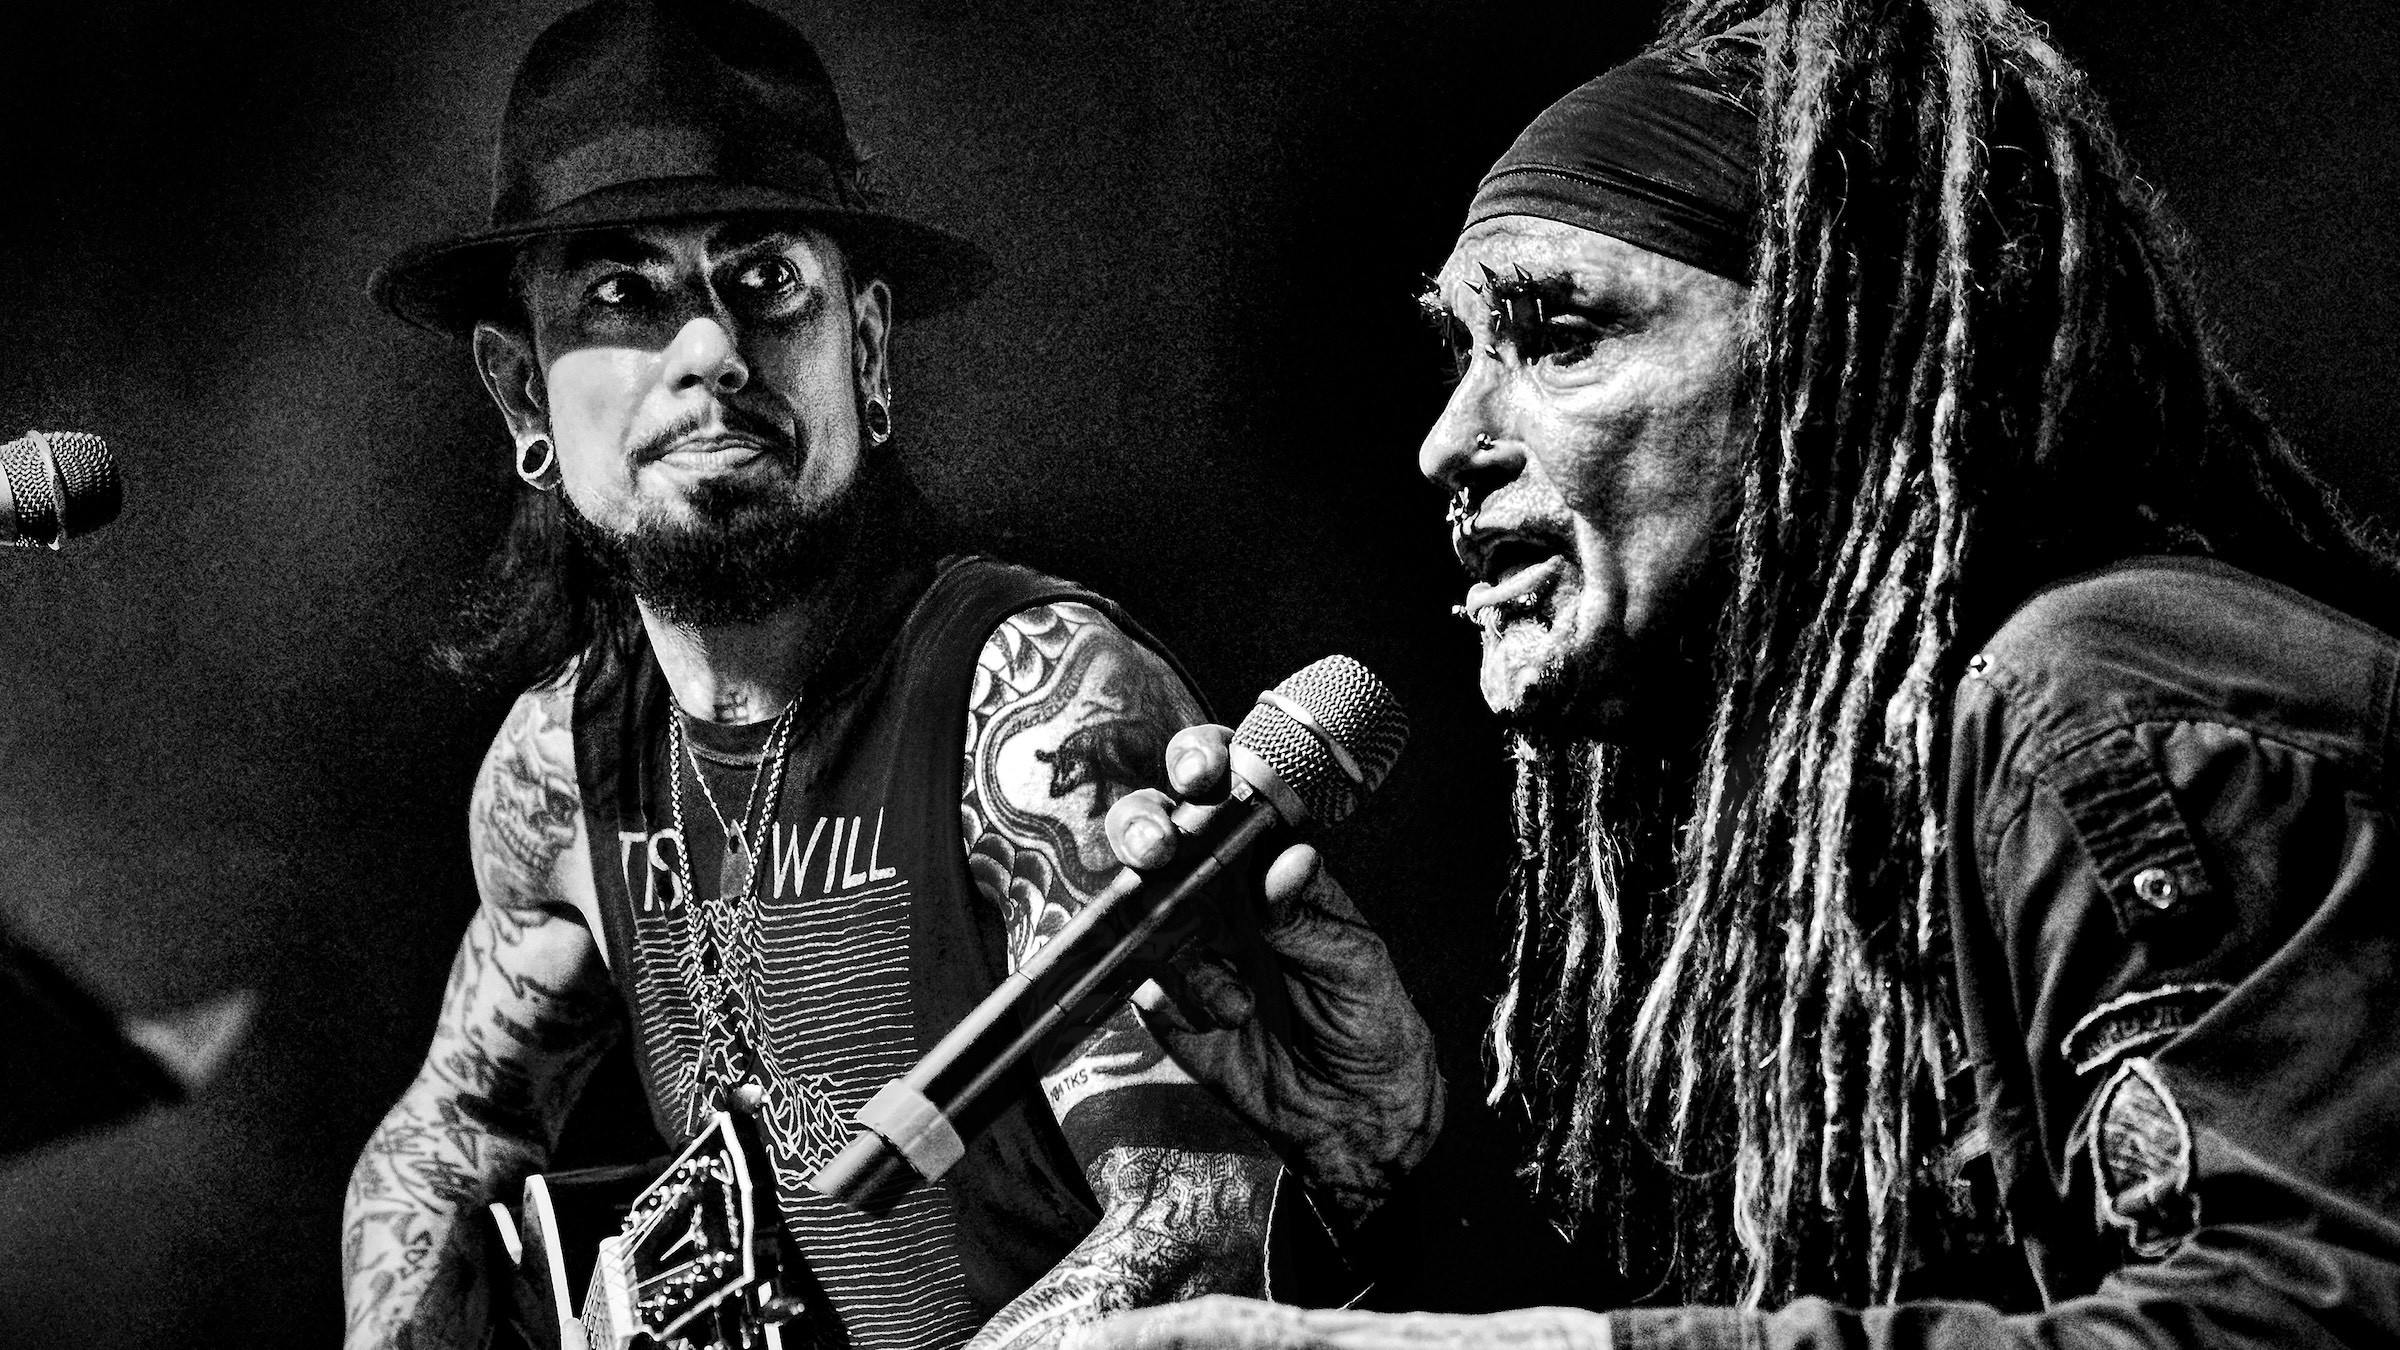 "I Shaved My Chest To Fit Into This Girdle": Inside Ministry's New Photo Book With Al Jourgensen